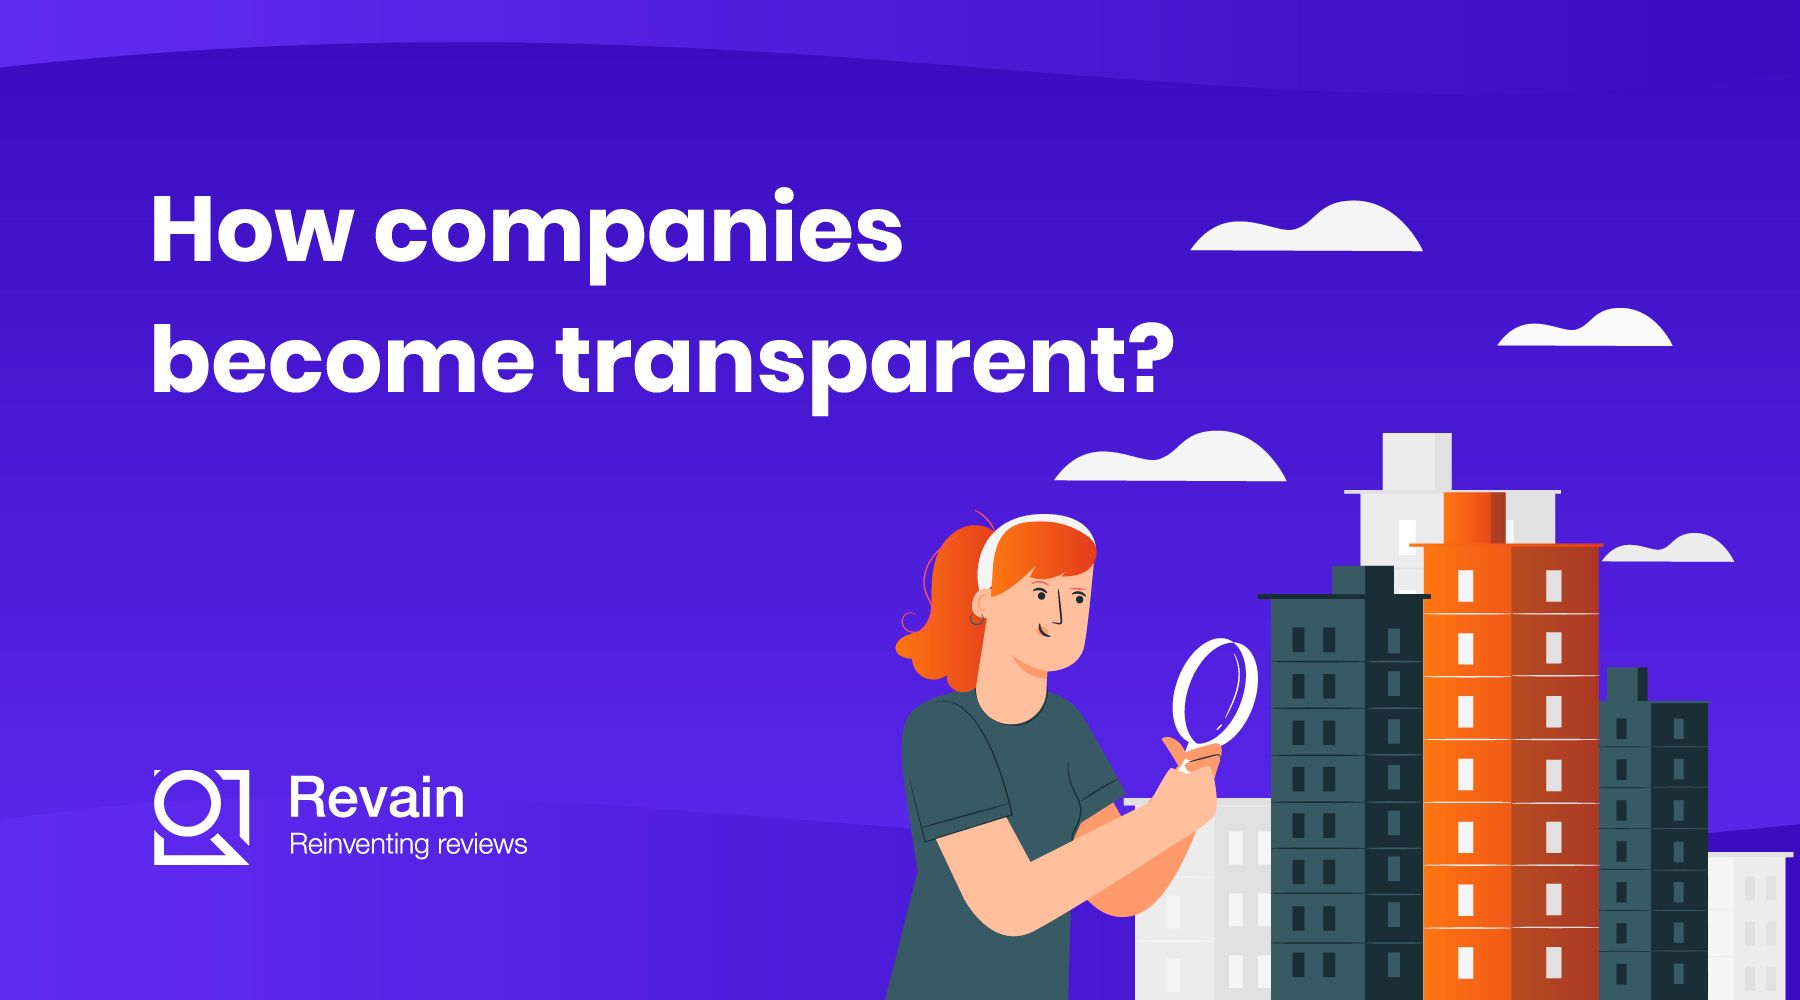 Article How companies become transparent